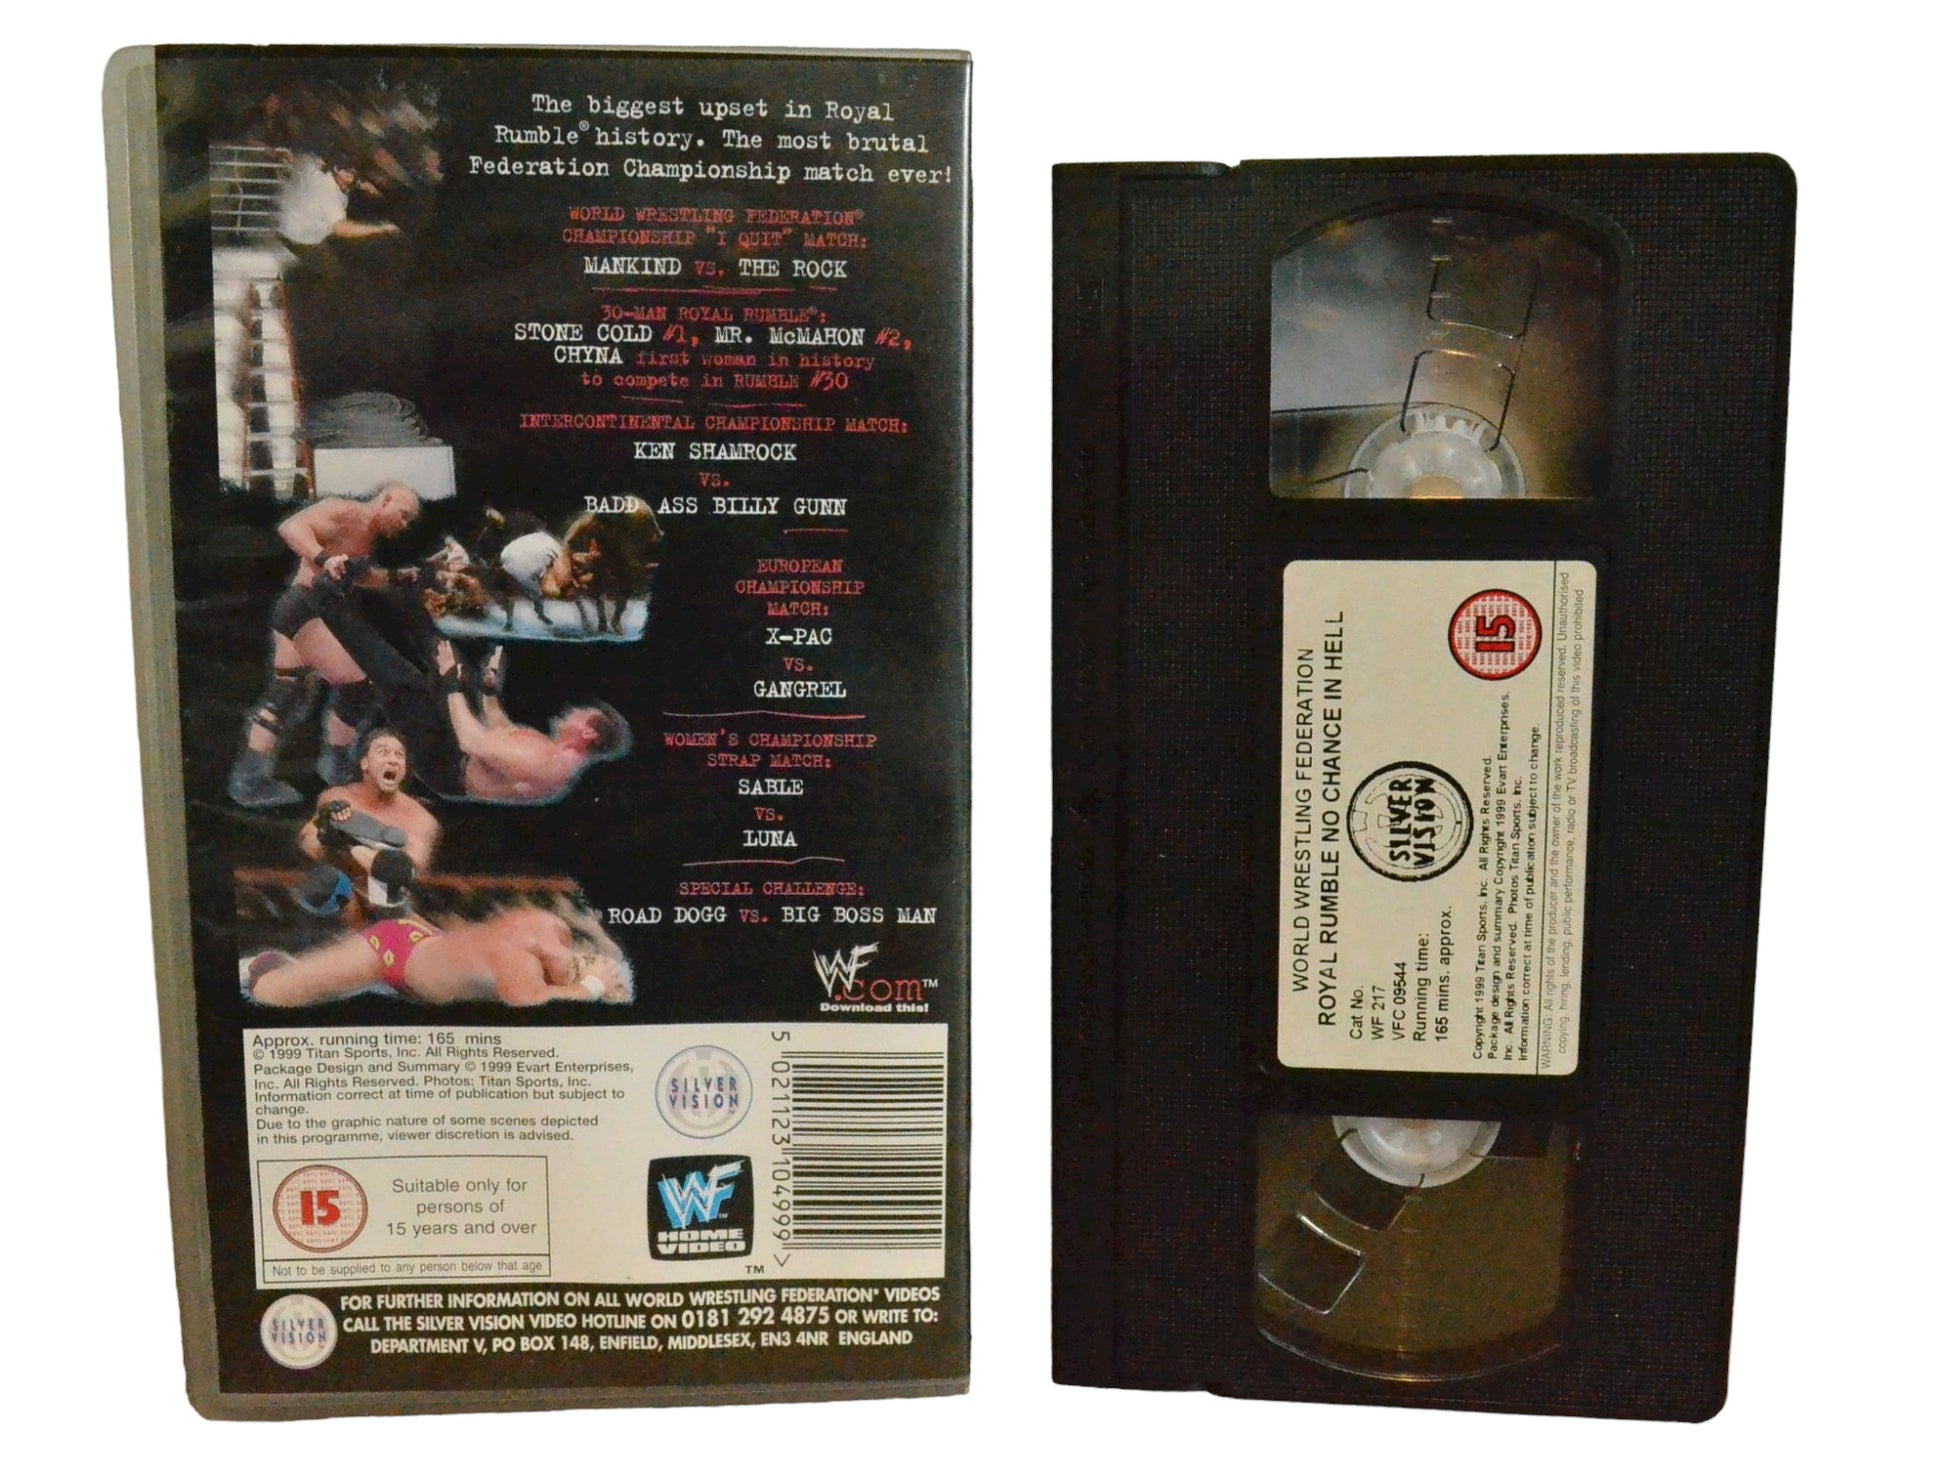 WWF: Royal Rumble No Chance In Hell - Dwayne Johnson - World Wrestling Federation Home Video - Wrestling - PAL - VHS-